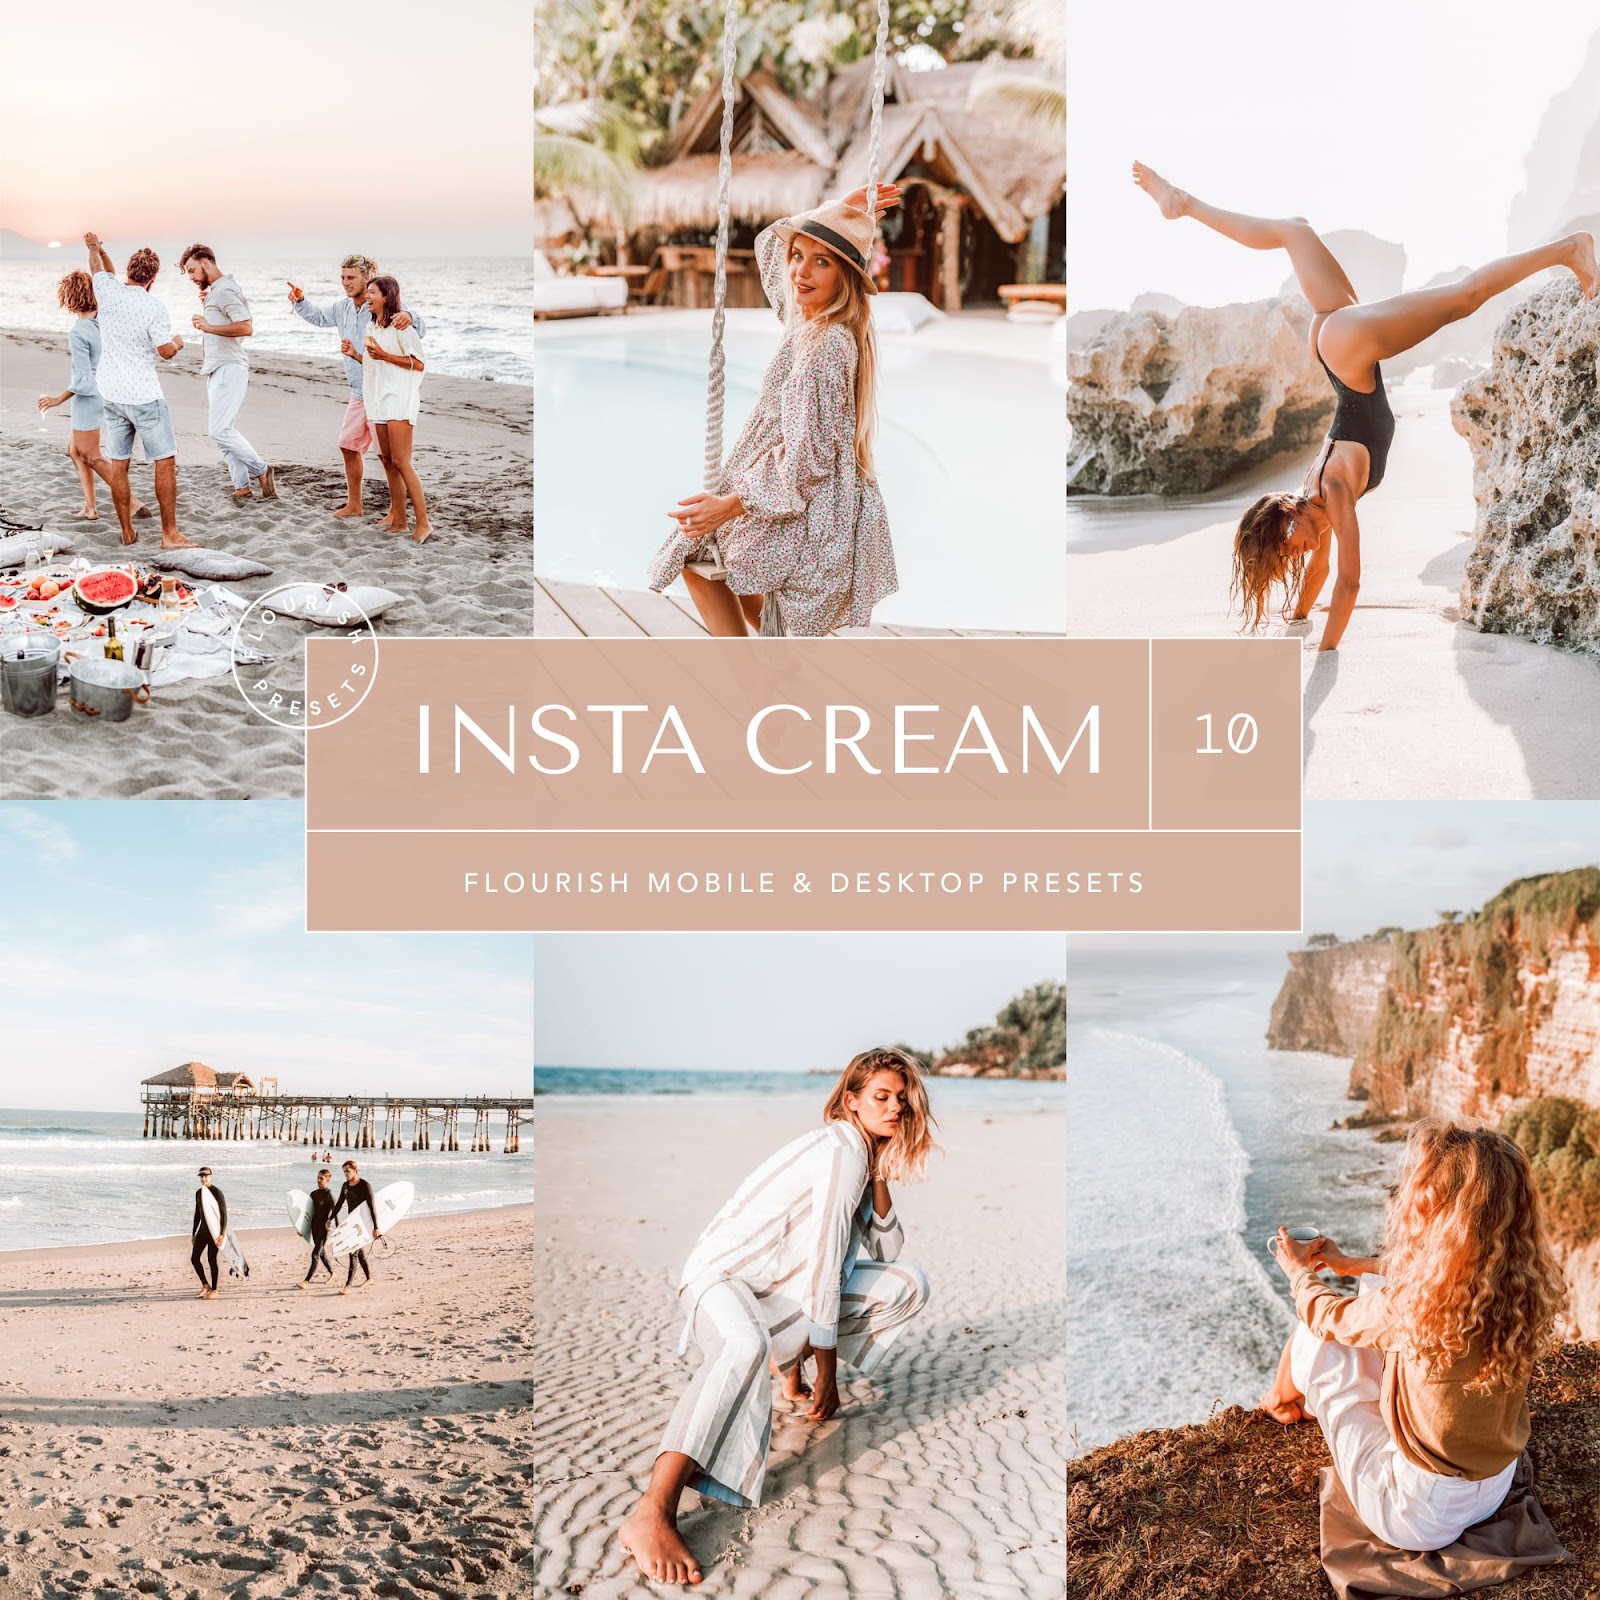 insta cream flourish presets cover grid before after